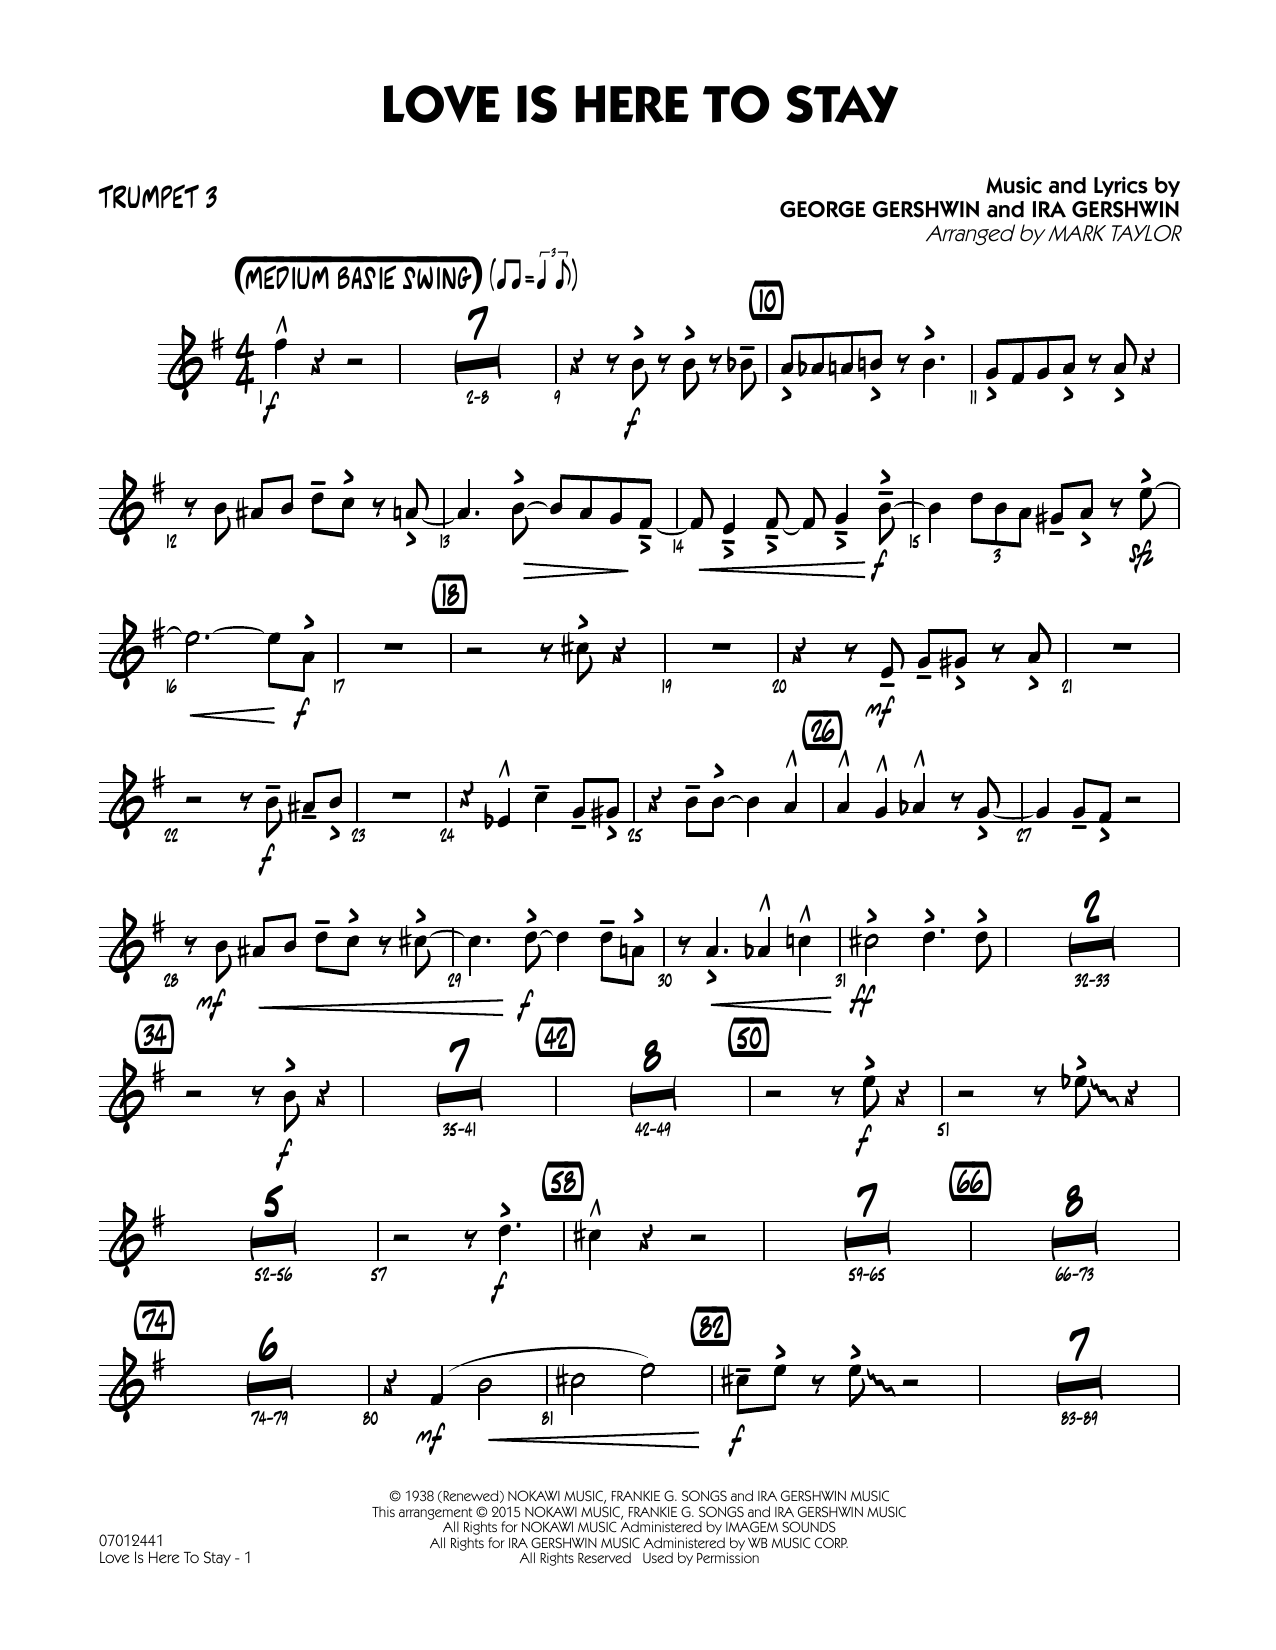 Mark Taylor Love Is Here to Stay - Trumpet 3 sheet music notes and chords. Download Printable PDF.